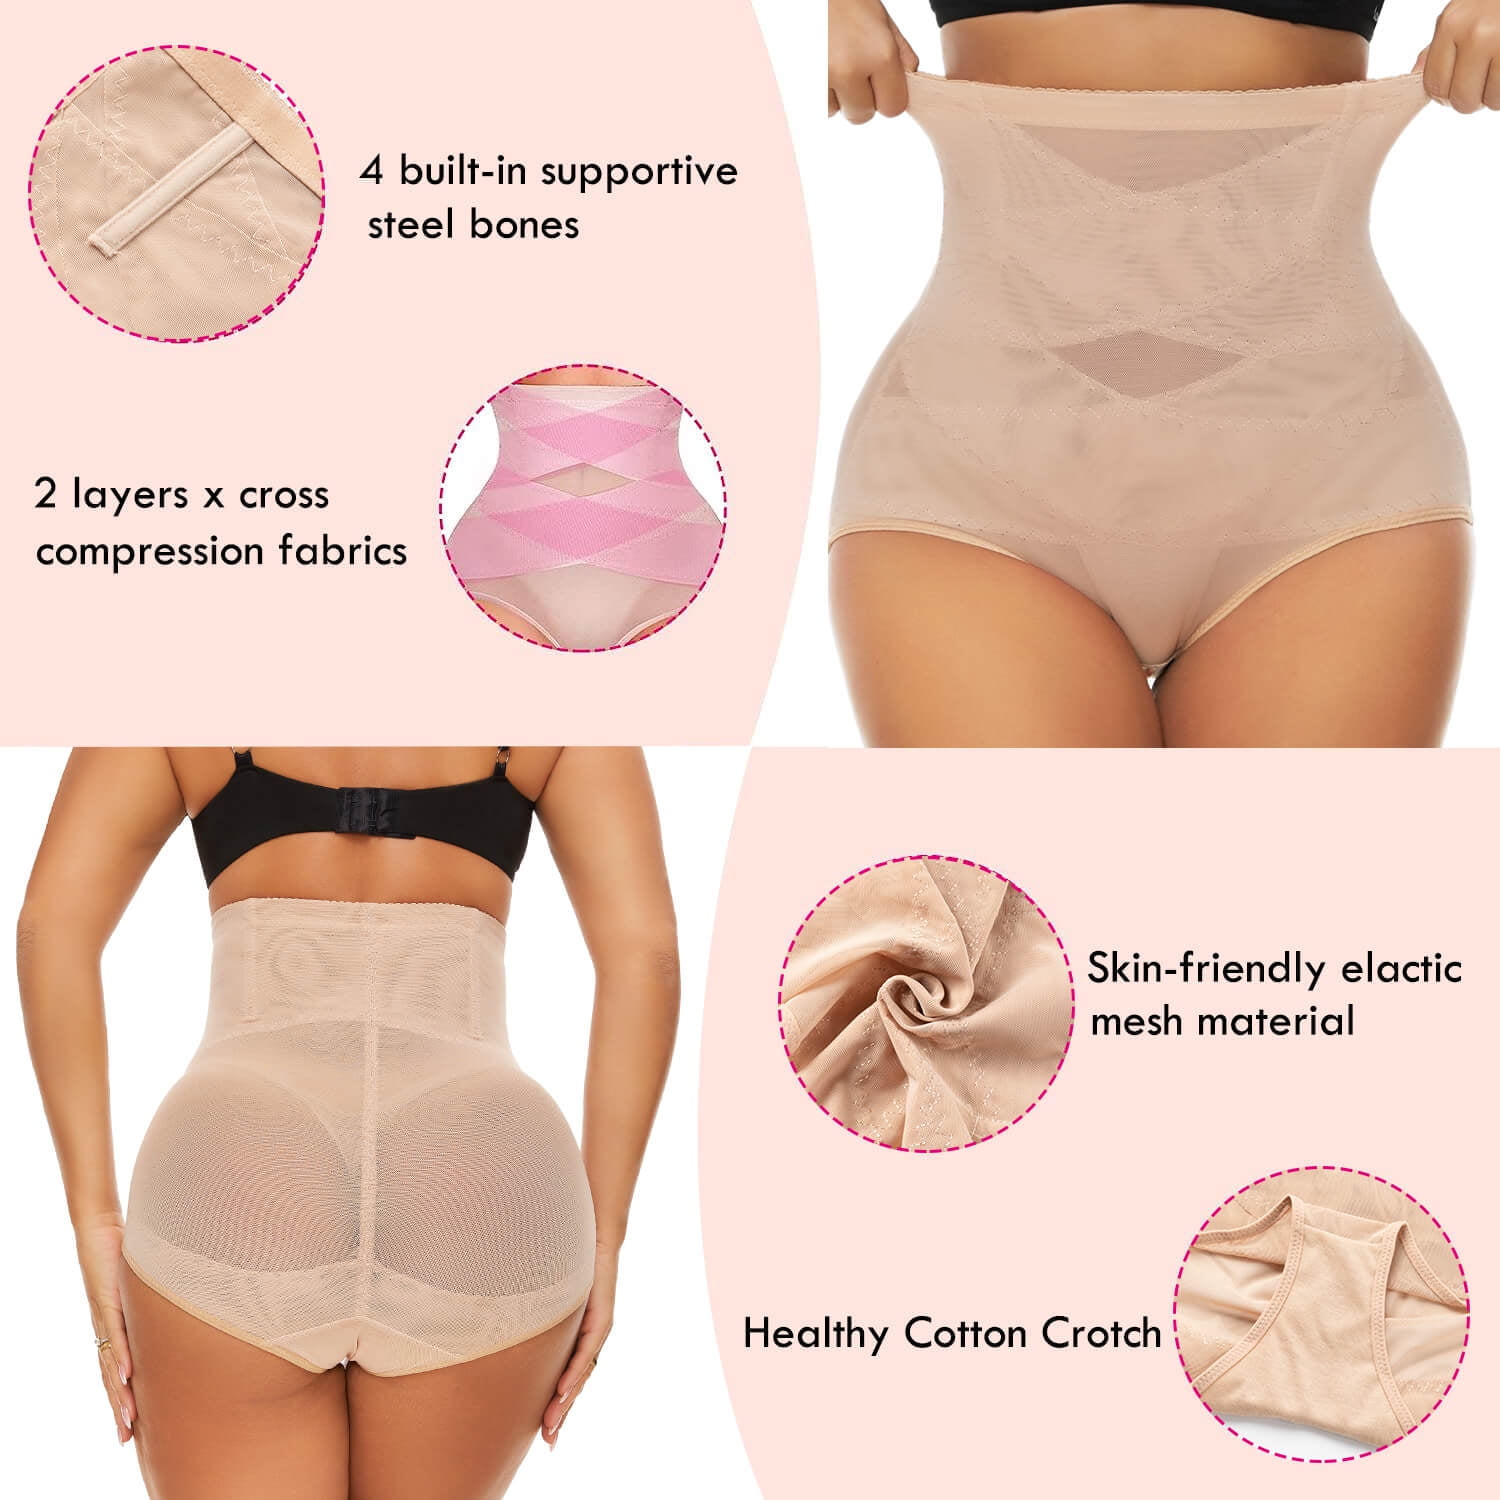 Colombian Body Shaper Jumia For Women Tummy Control Butt Lifter Girdle With Fajas  Moldeadoras Para Mujer From Daylight, $20.97